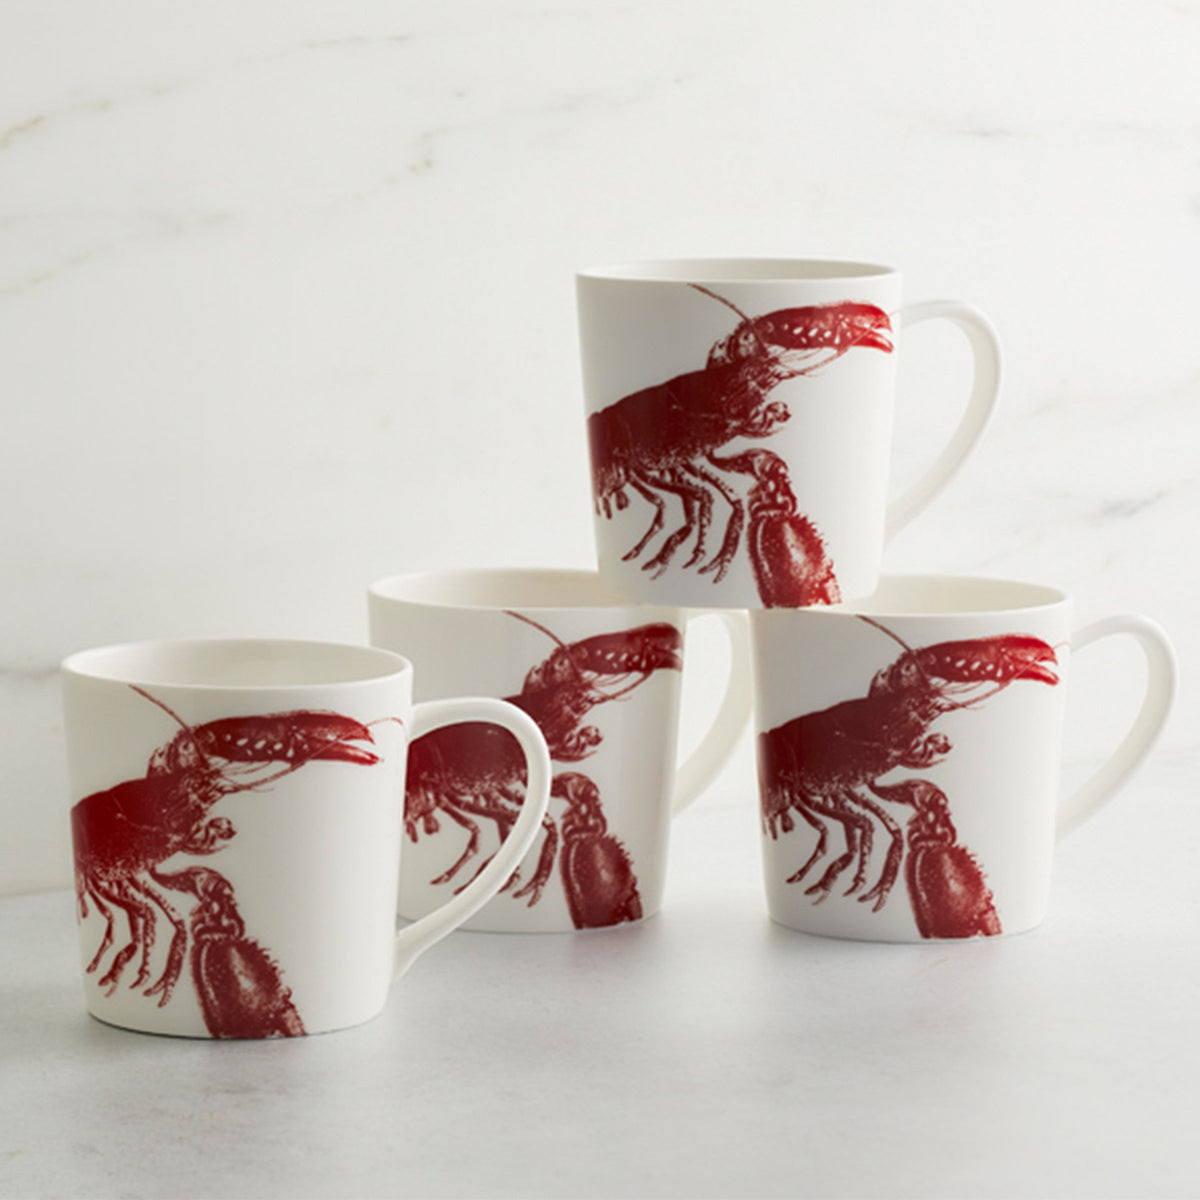 Four white, high-fired Lobster Red Mugs by Caskata Artisanal Home with red illustrations are arranged on a grey surface against a white background, with two mugs stacked on two others, showcasing a charming seaside style.